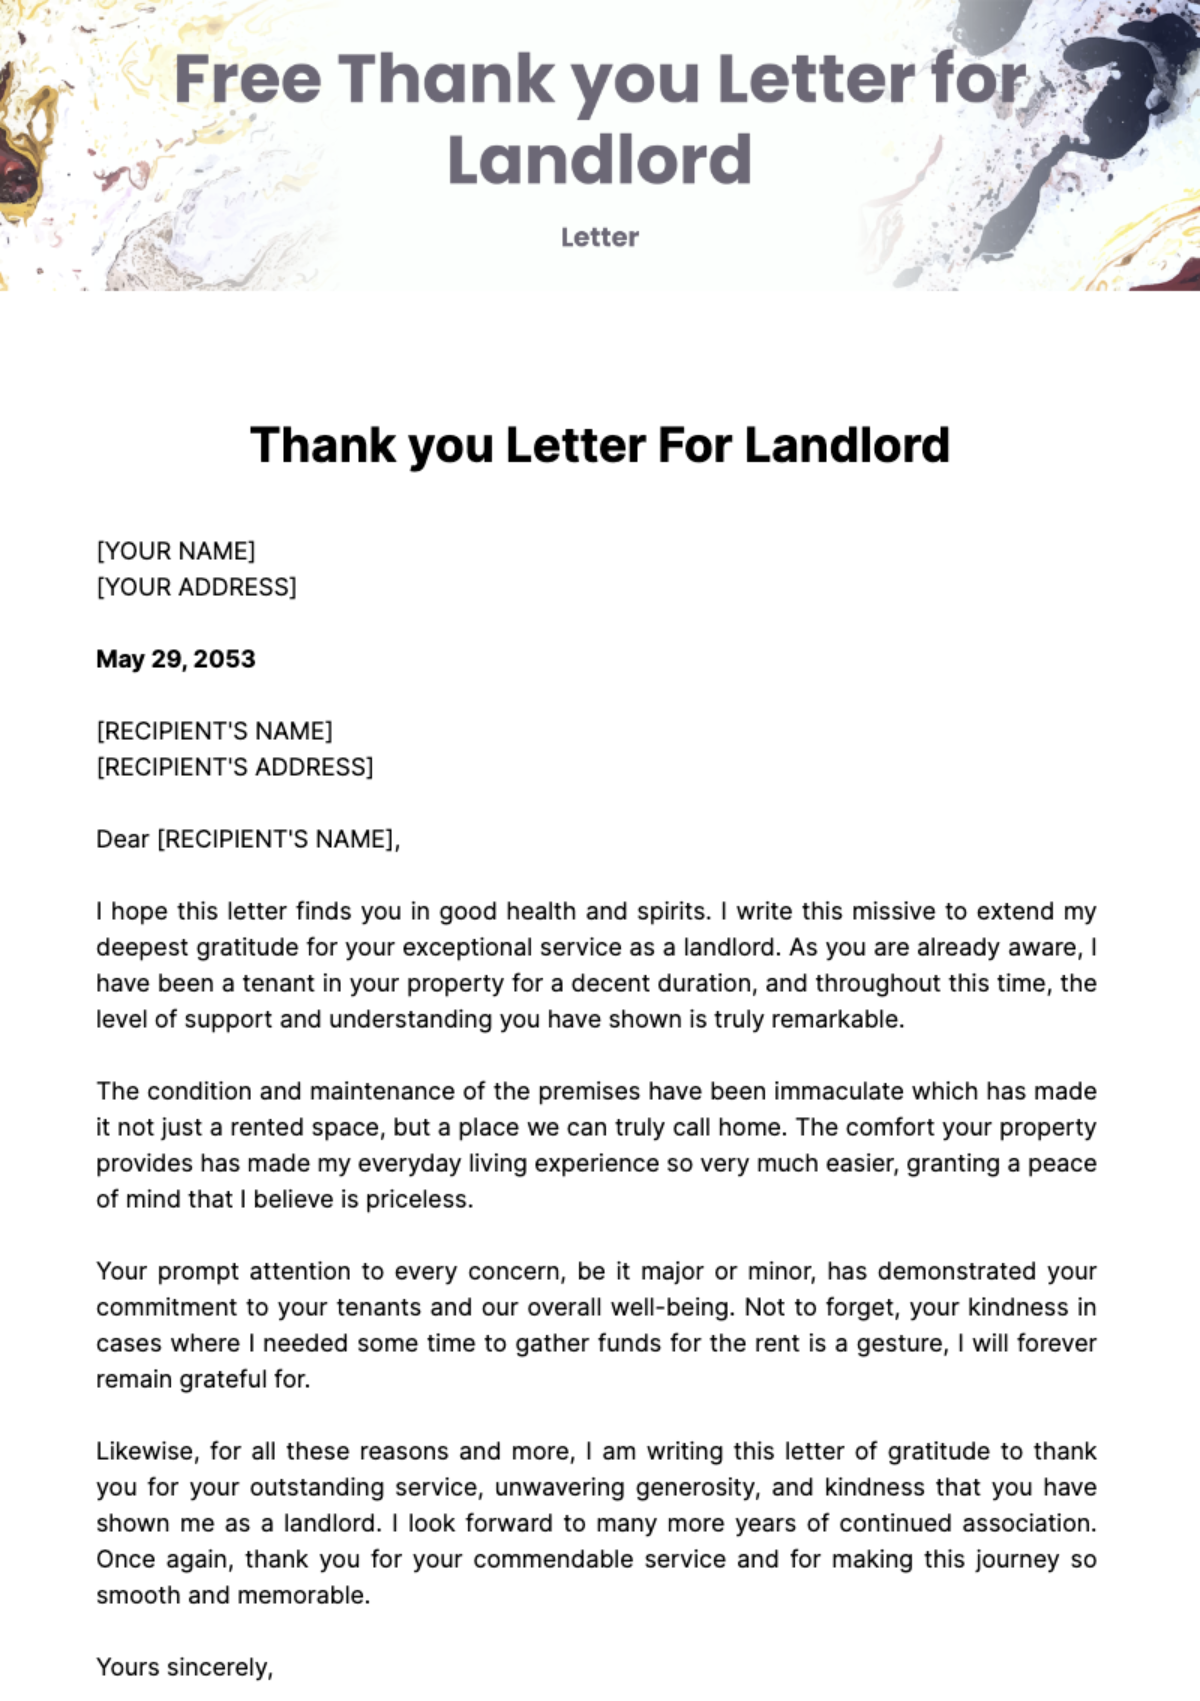 Thank you Letter for Landlord Template